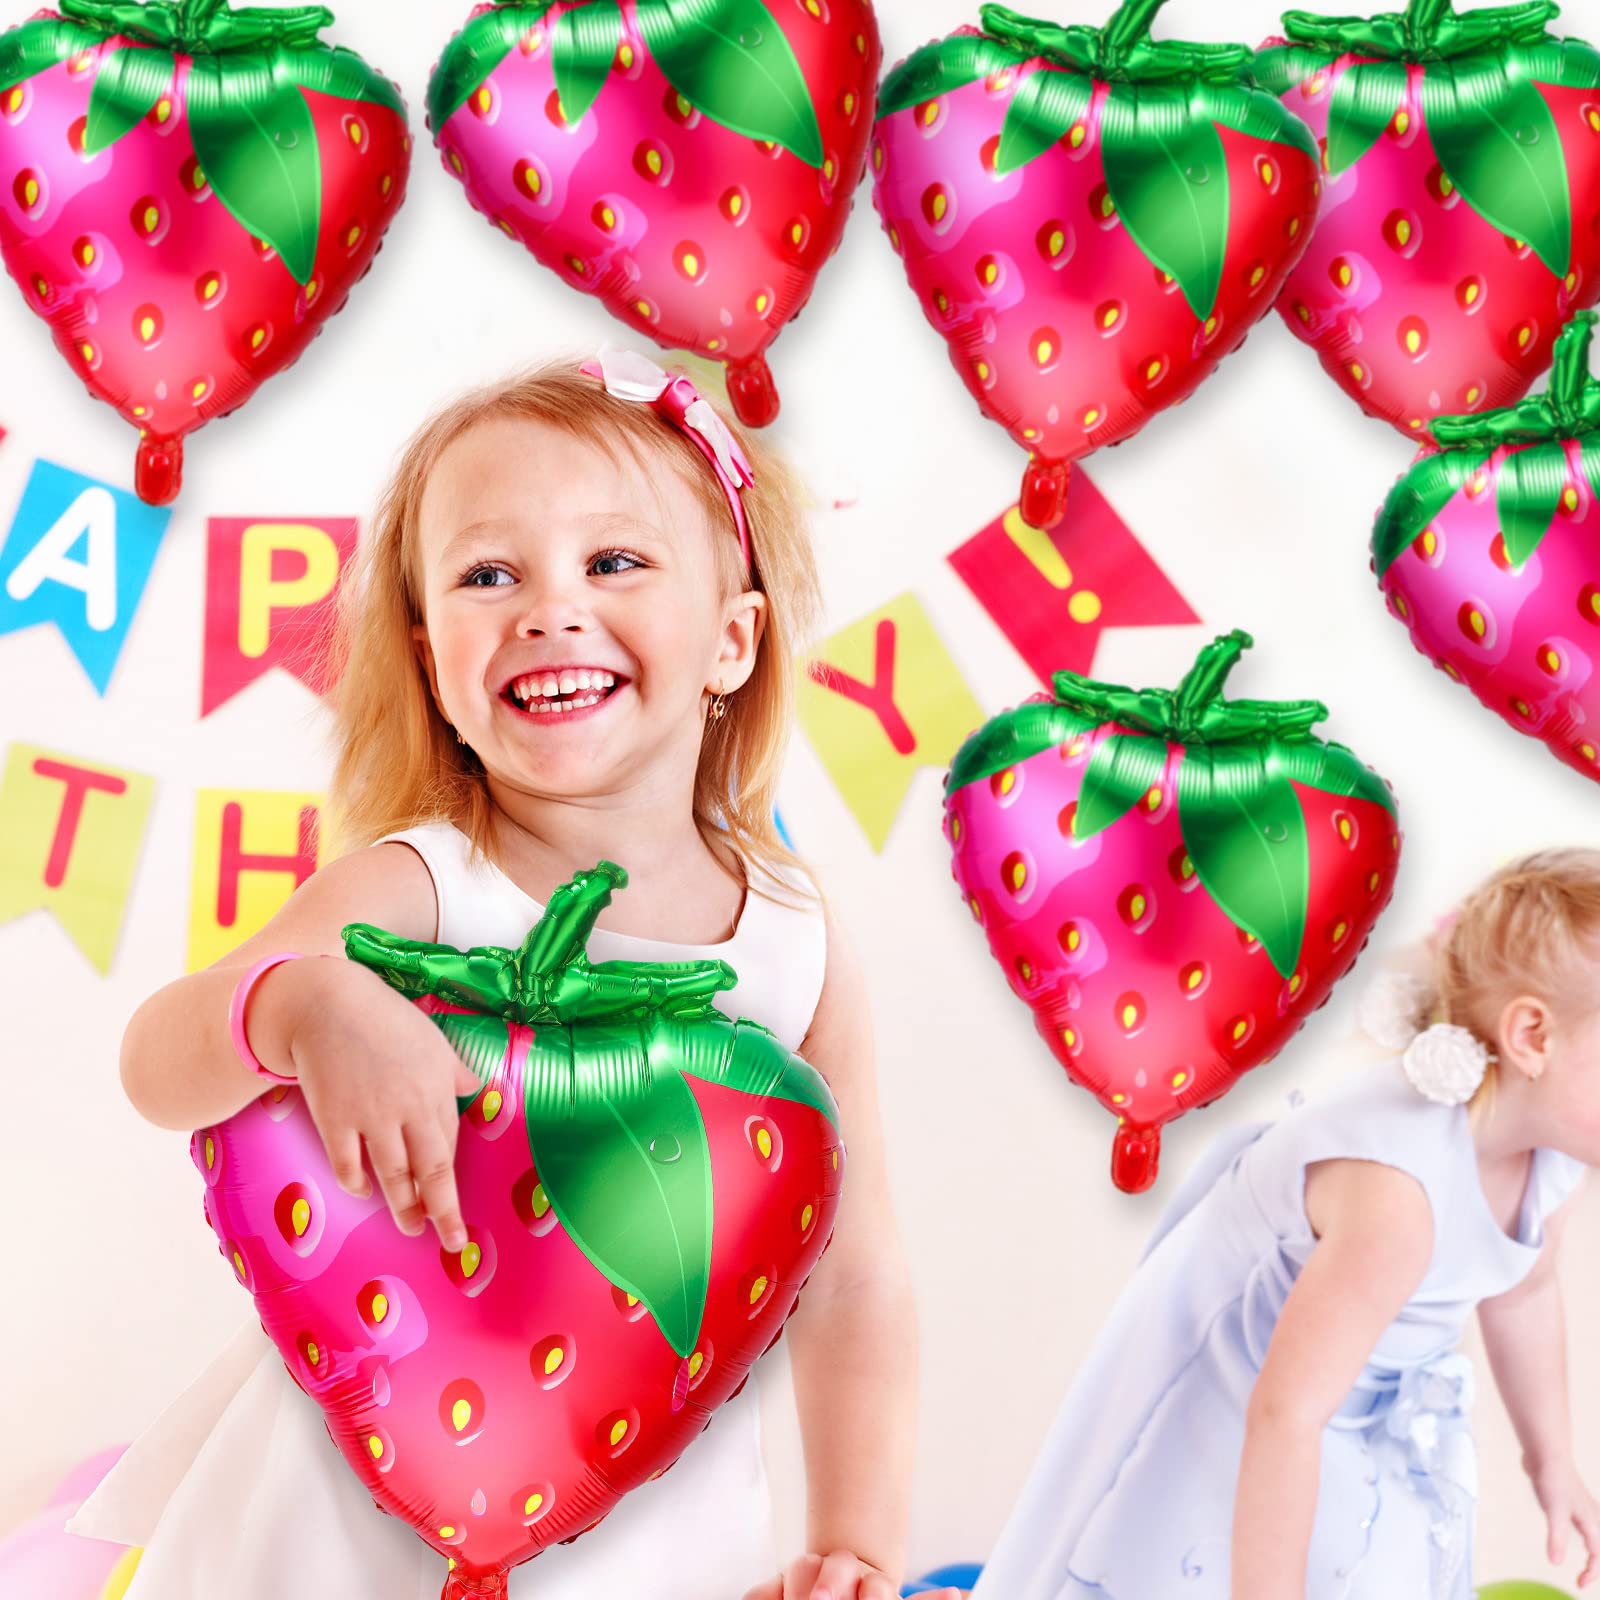 16 Pieces Strawberry Balloons Strawberry Foil Balloons Cute Fruit Balloon for Baby Girls Berry Sweet Birthday Party Decorations, 18.9 x 24.8 Inch